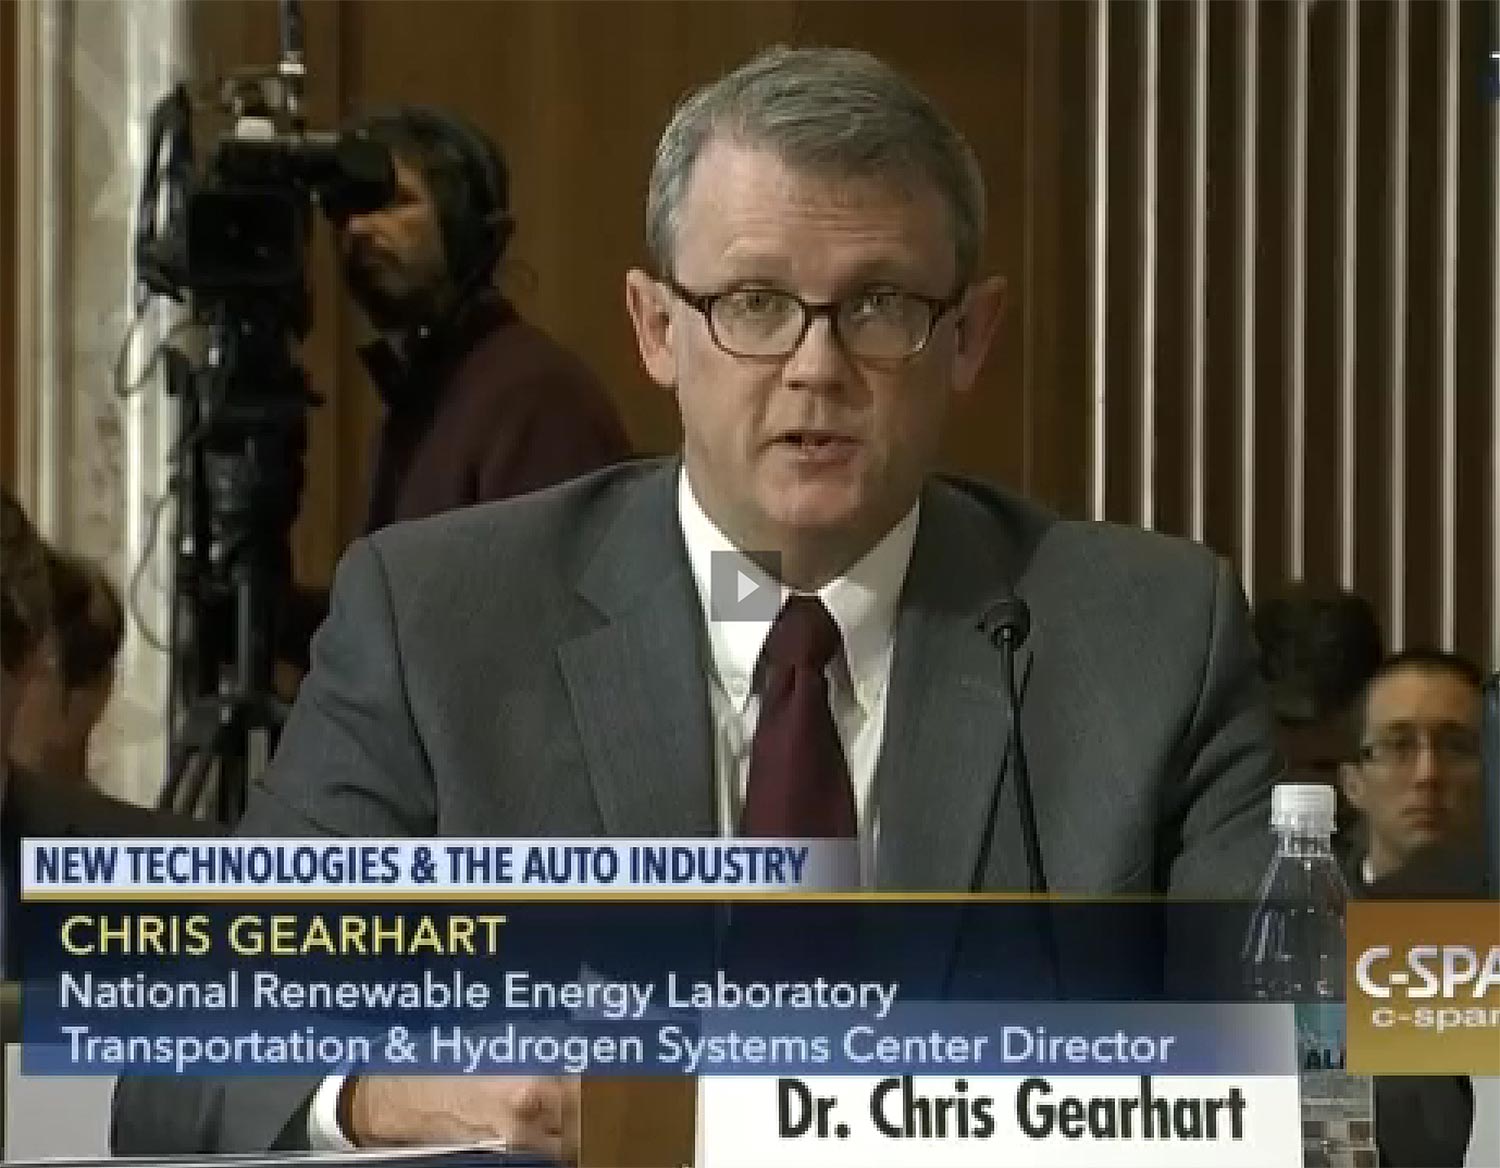 Photo of a man wearing glasses and in a suit sitting in front of a nameplate that says: "Dr. Chris Gearhart." Text over image says: "New Technologies & The Auto Industry; Chris Gearhart, National Renewable Energy Laboratory, Transportation Systems Center Director.